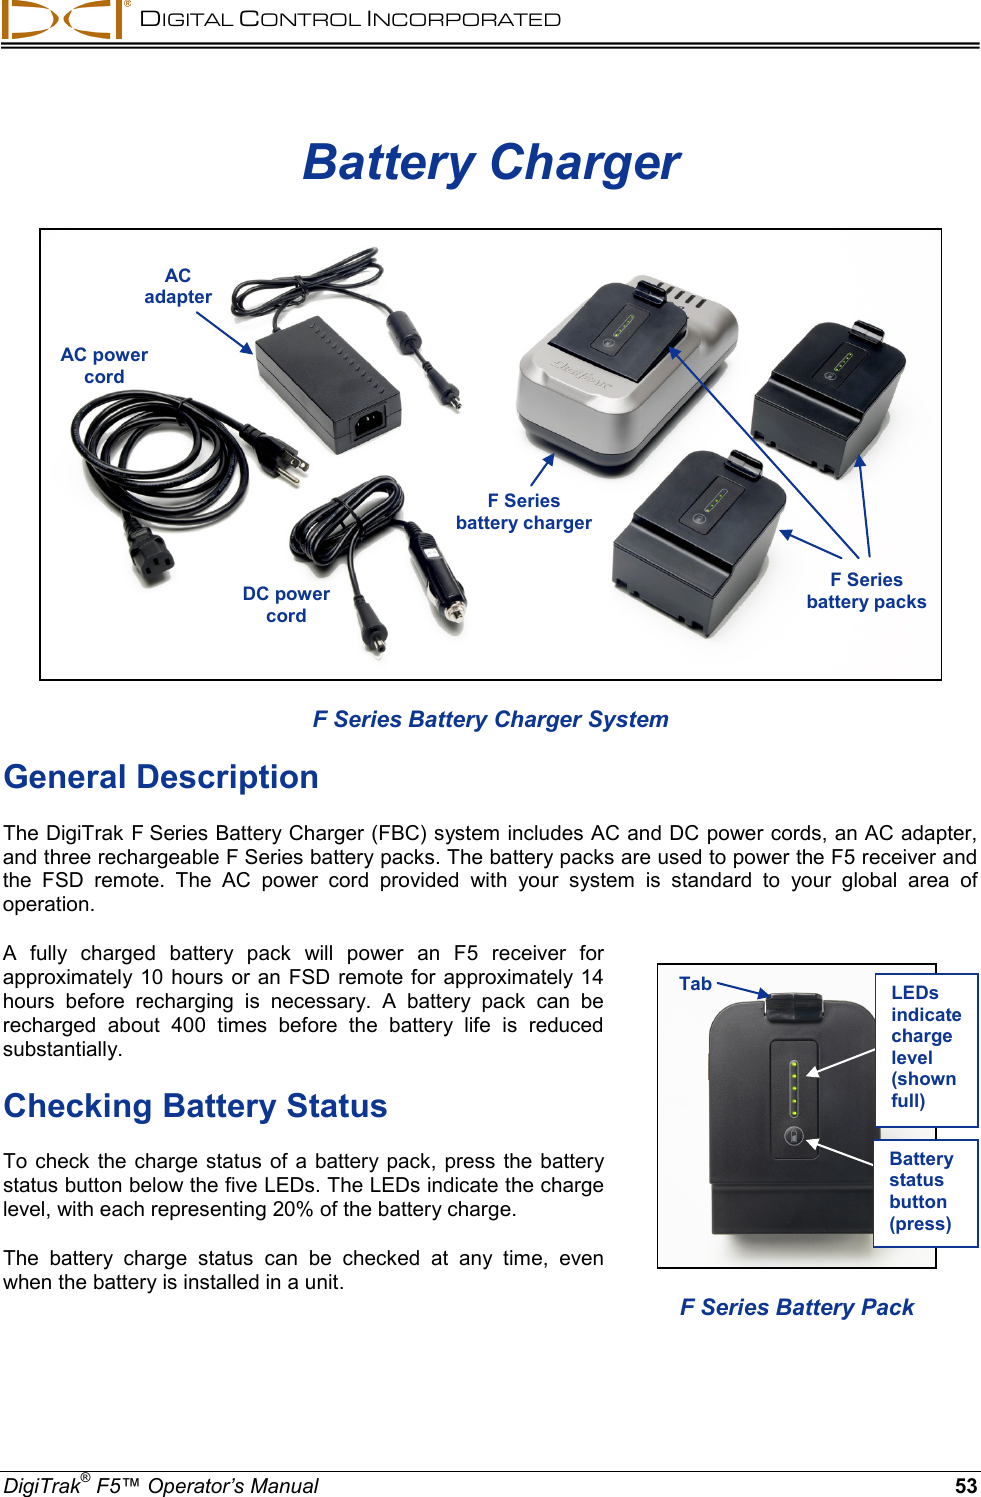  DIGITAL CONTROL INCORPORATED  DigiTrak® F5™ Operator’s Manual 53 Battery Charger  F Series Battery Charger System General Description The DigiTrak F Series Battery Charger (FBC) system includes AC and DC power cords, an AC adapter, and three rechargeable F Series battery packs. The battery packs are used to power the F5 receiver and the FSD remote. The AC power cord provided  with your system is standard to your global area of operation. A fully charged battery pack will power an F5 receiver for approximately 10 hours or an FSD remote for approximately 14 hours before recharging is necessary. A battery pack can be recharged about 400 times before the battery life is reduced substantially. Checking Battery Status To check the charge status of a battery pack, press the battery status button below the five LEDs. The LEDs indicate the charge level, with each representing 20% of the battery charge.  The battery charge status can be checked at any time, even when the battery is installed in a unit.    AC adapter AC power cord F Series  battery charger F Series  battery packs  DC power cord   F Series Battery Pack Tab LEDs indicate charge level (shown full) Battery status button (press) 